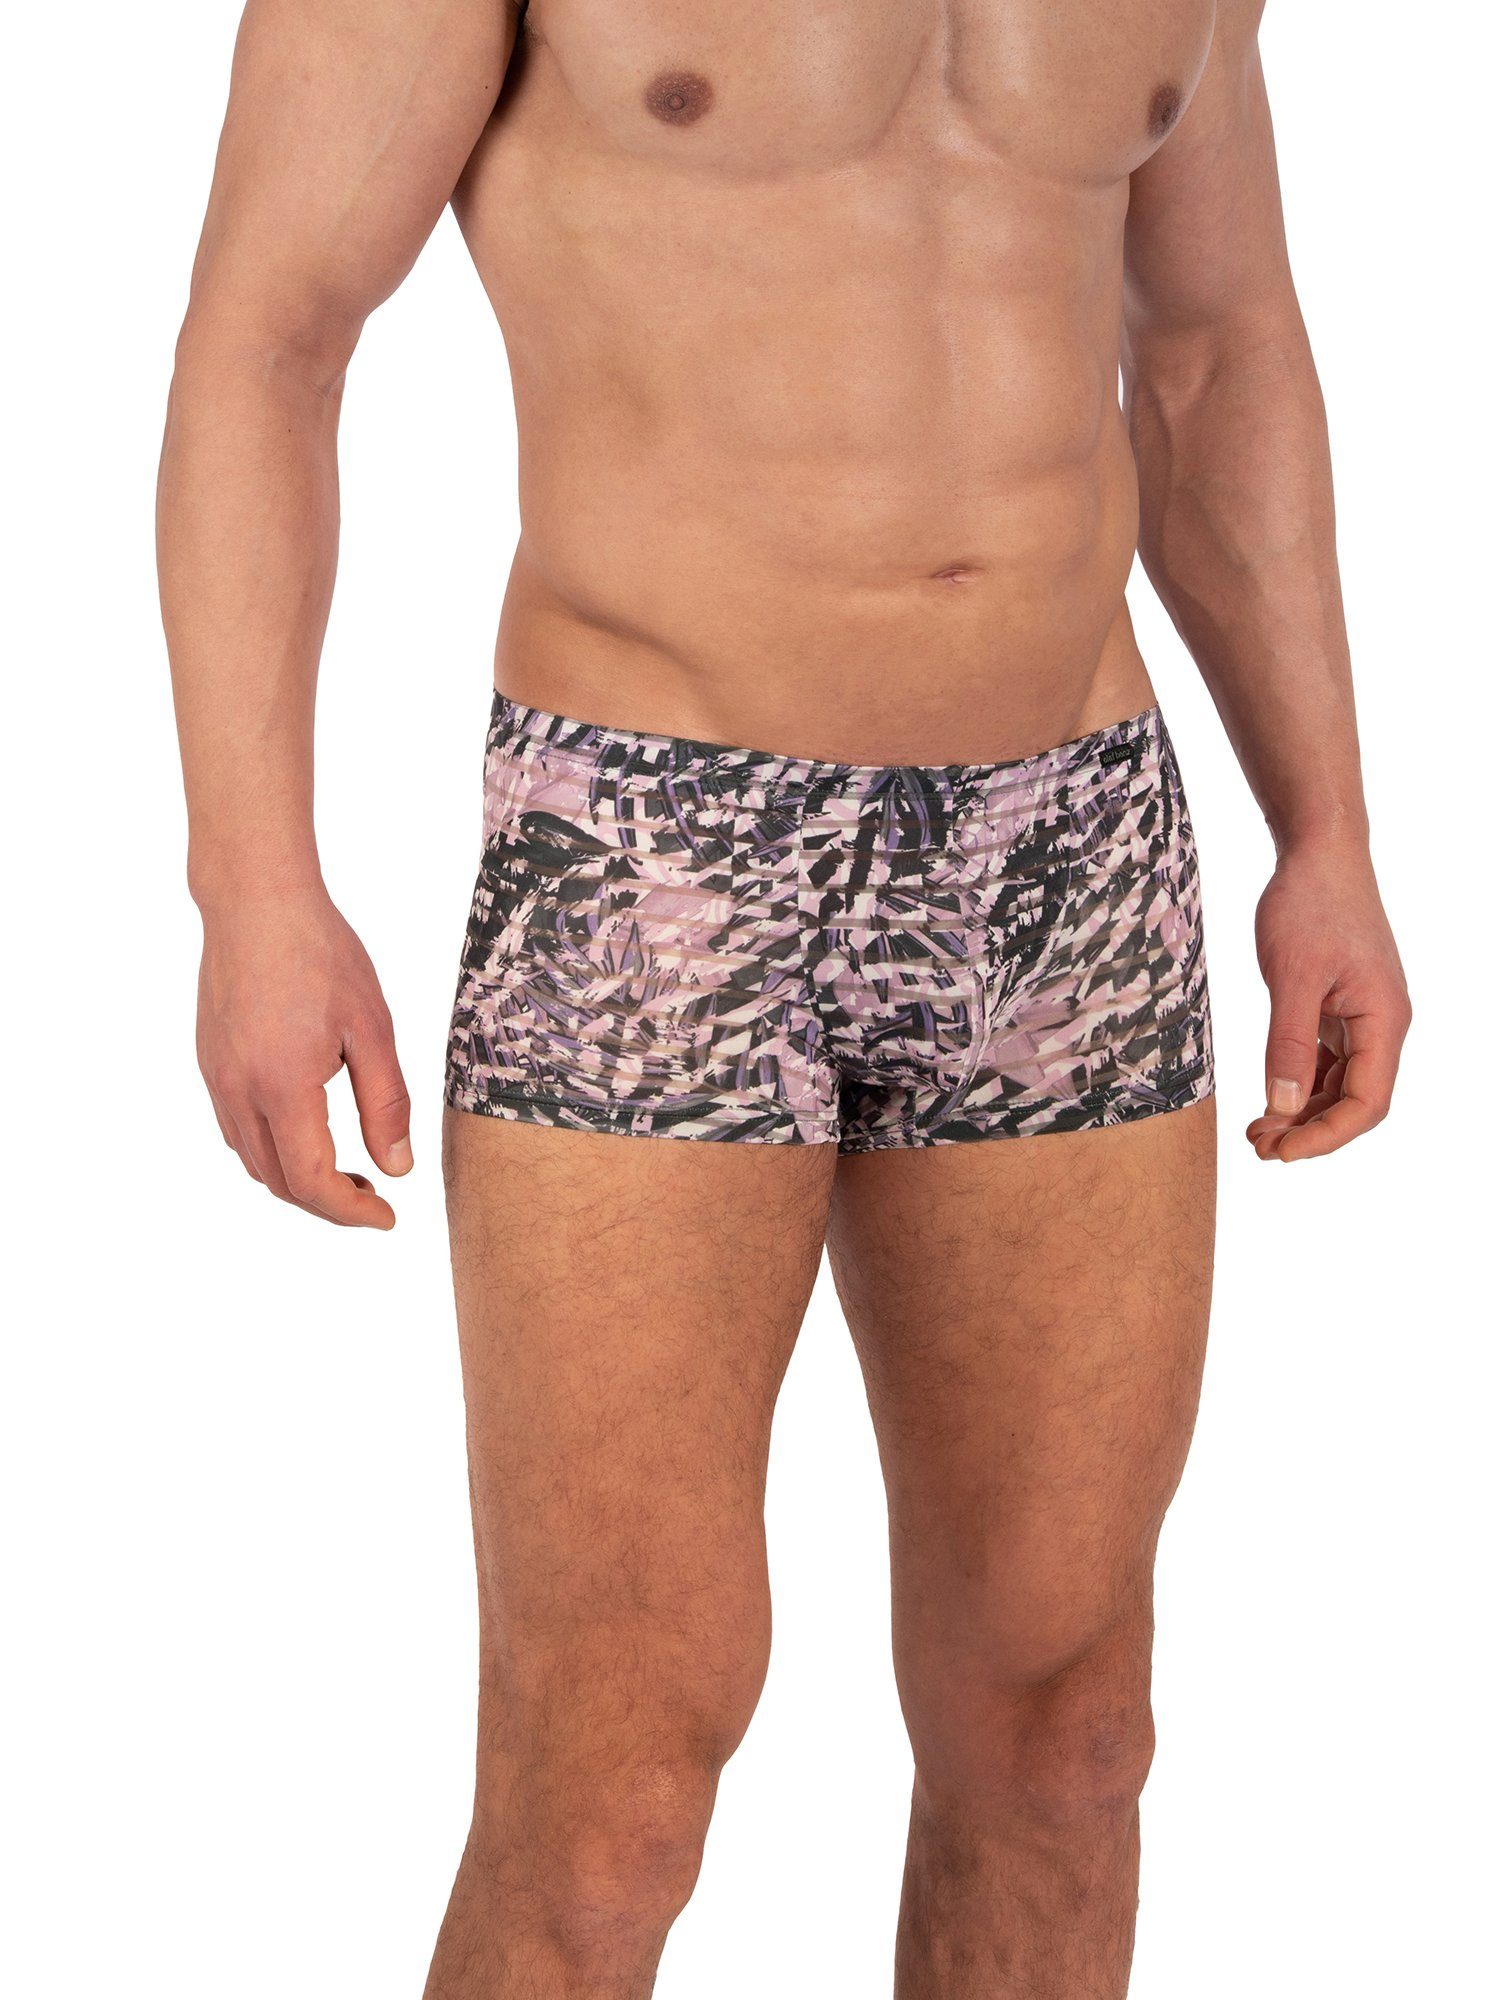 Minipants Boxer RED2333 violet Benz style retroshorts Retro-Boxer Retro Olaf boxershorts